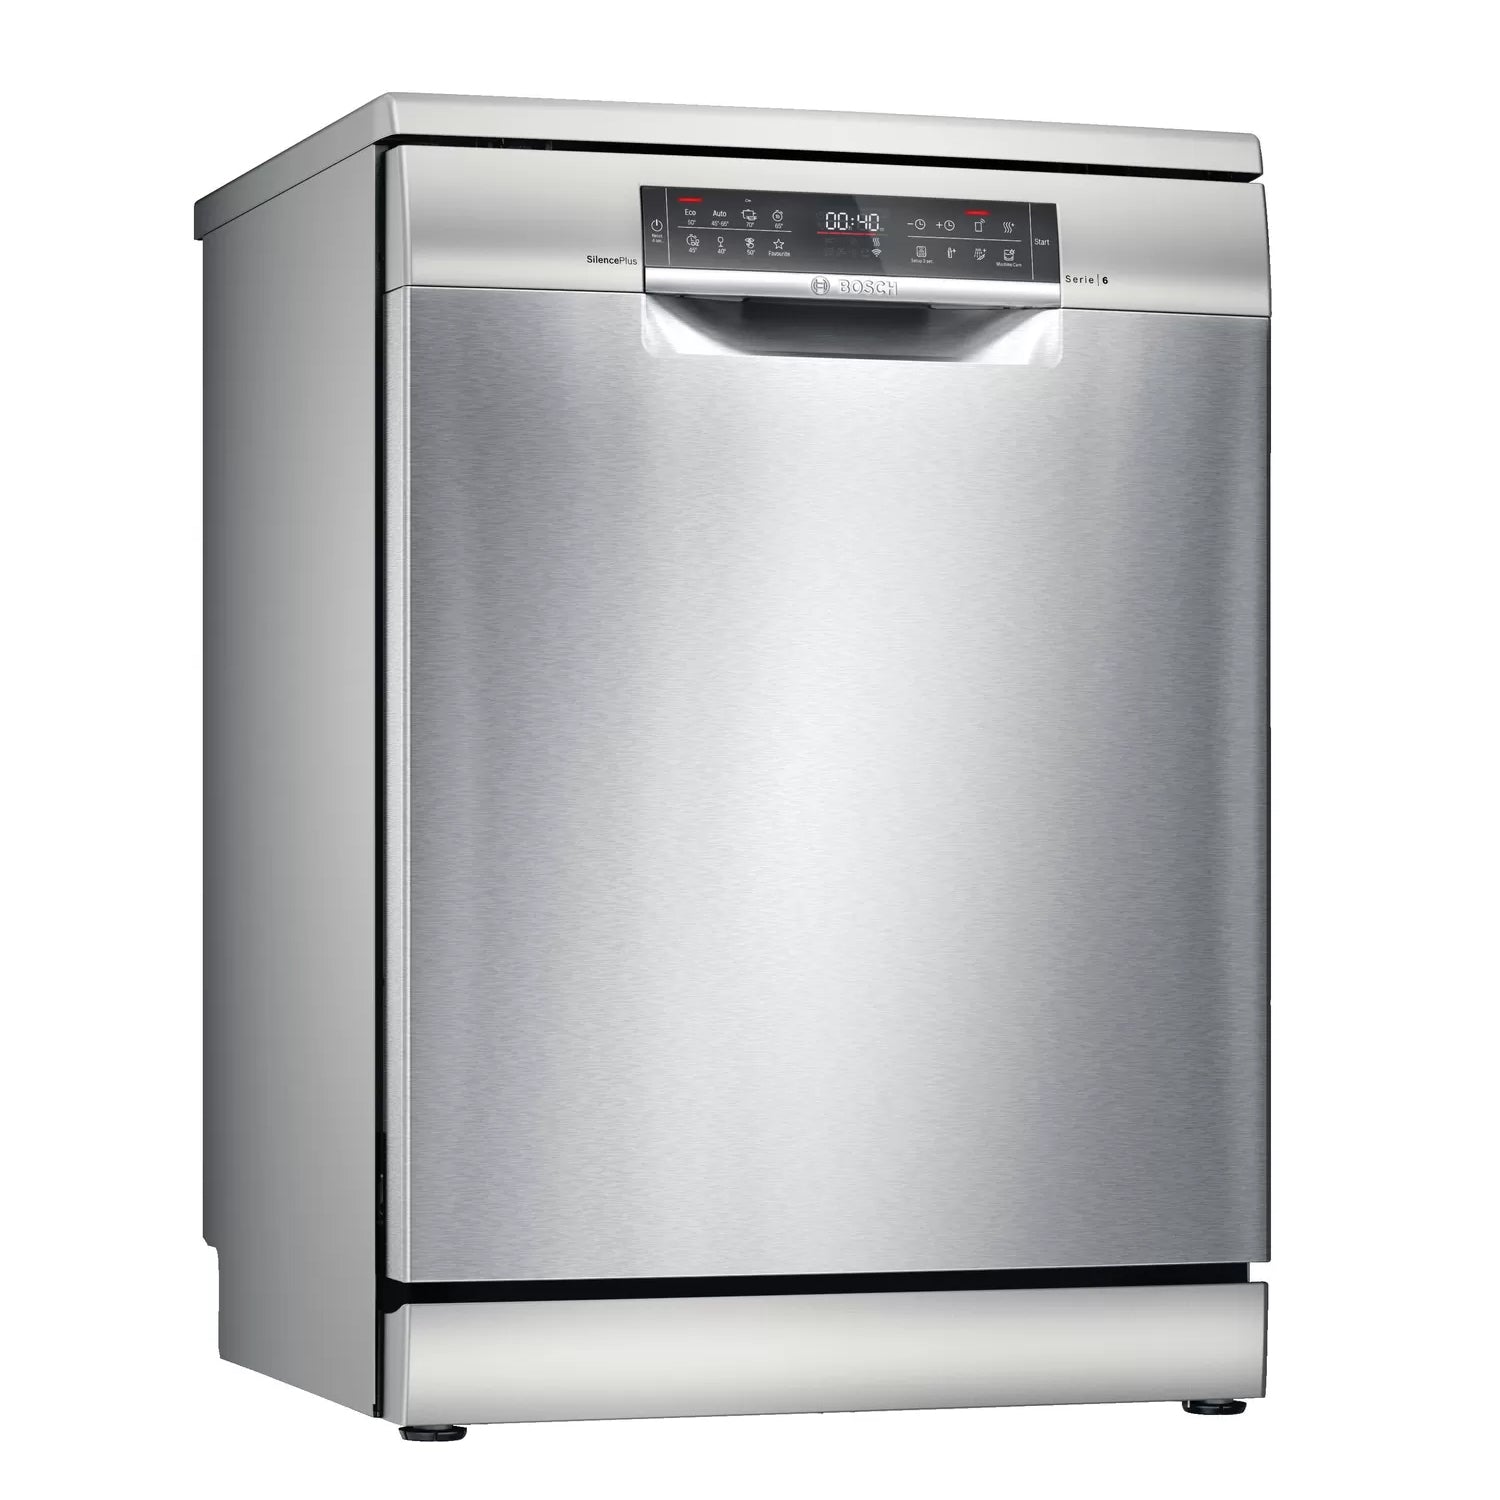 Bosch 13 Place Setting Dishwasher Stainless Steel SMS6HCI01Z